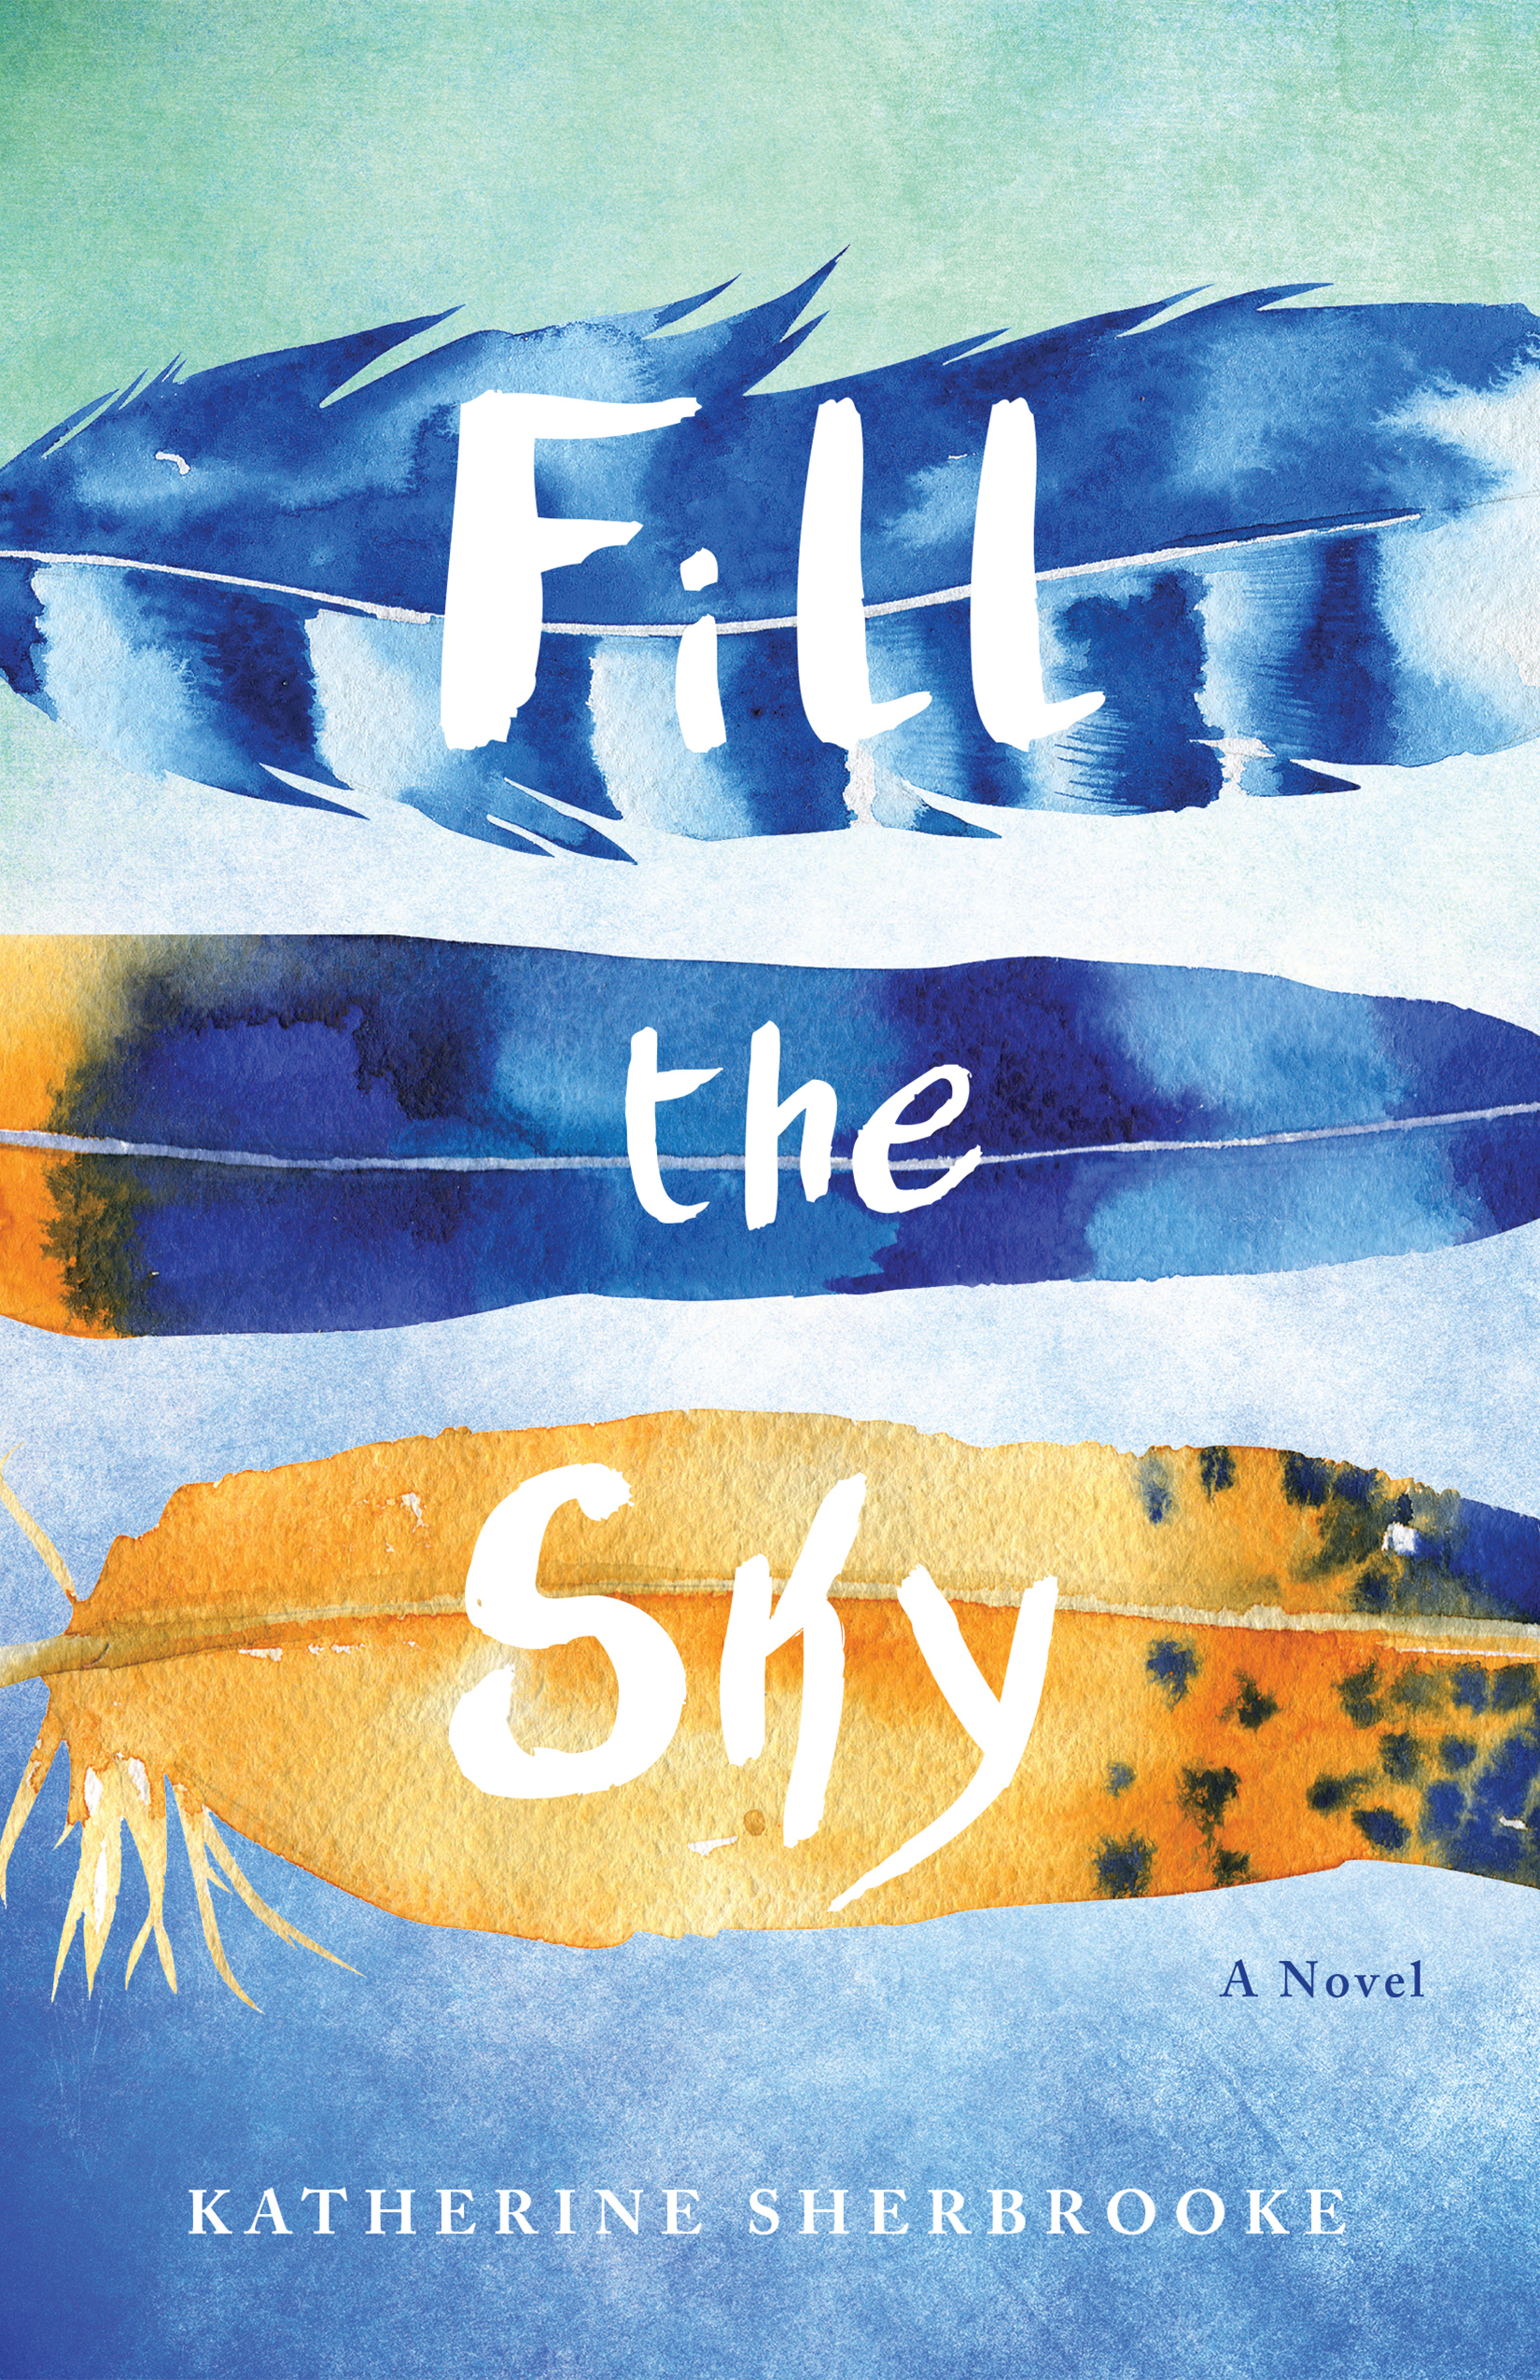 Blog Tour & Book Review: “Fill The Sky” by Katherine Sherbrooke